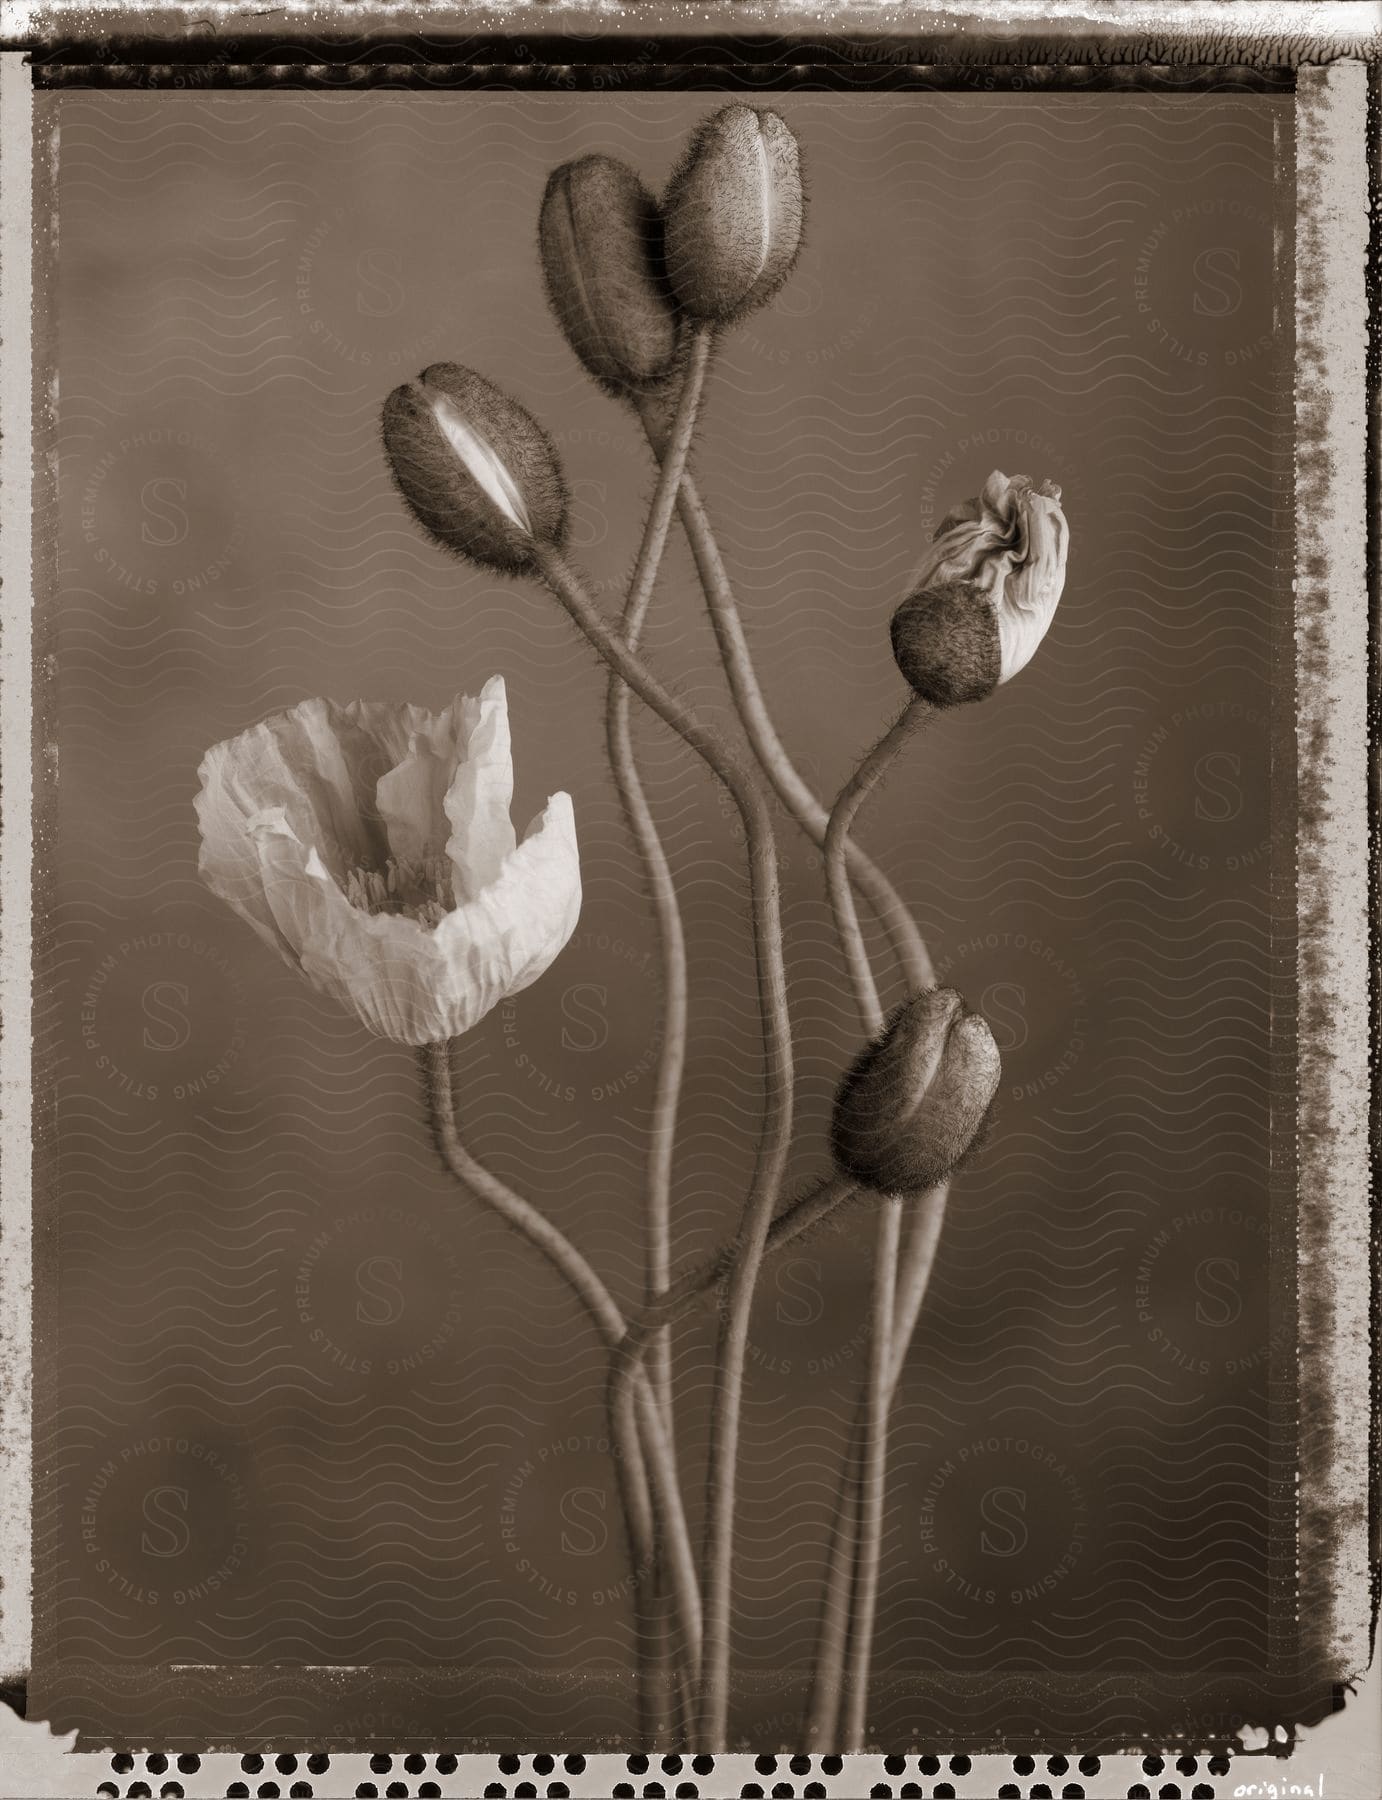 A flower plant with small group of petals and a stem photographed indoors in sepia